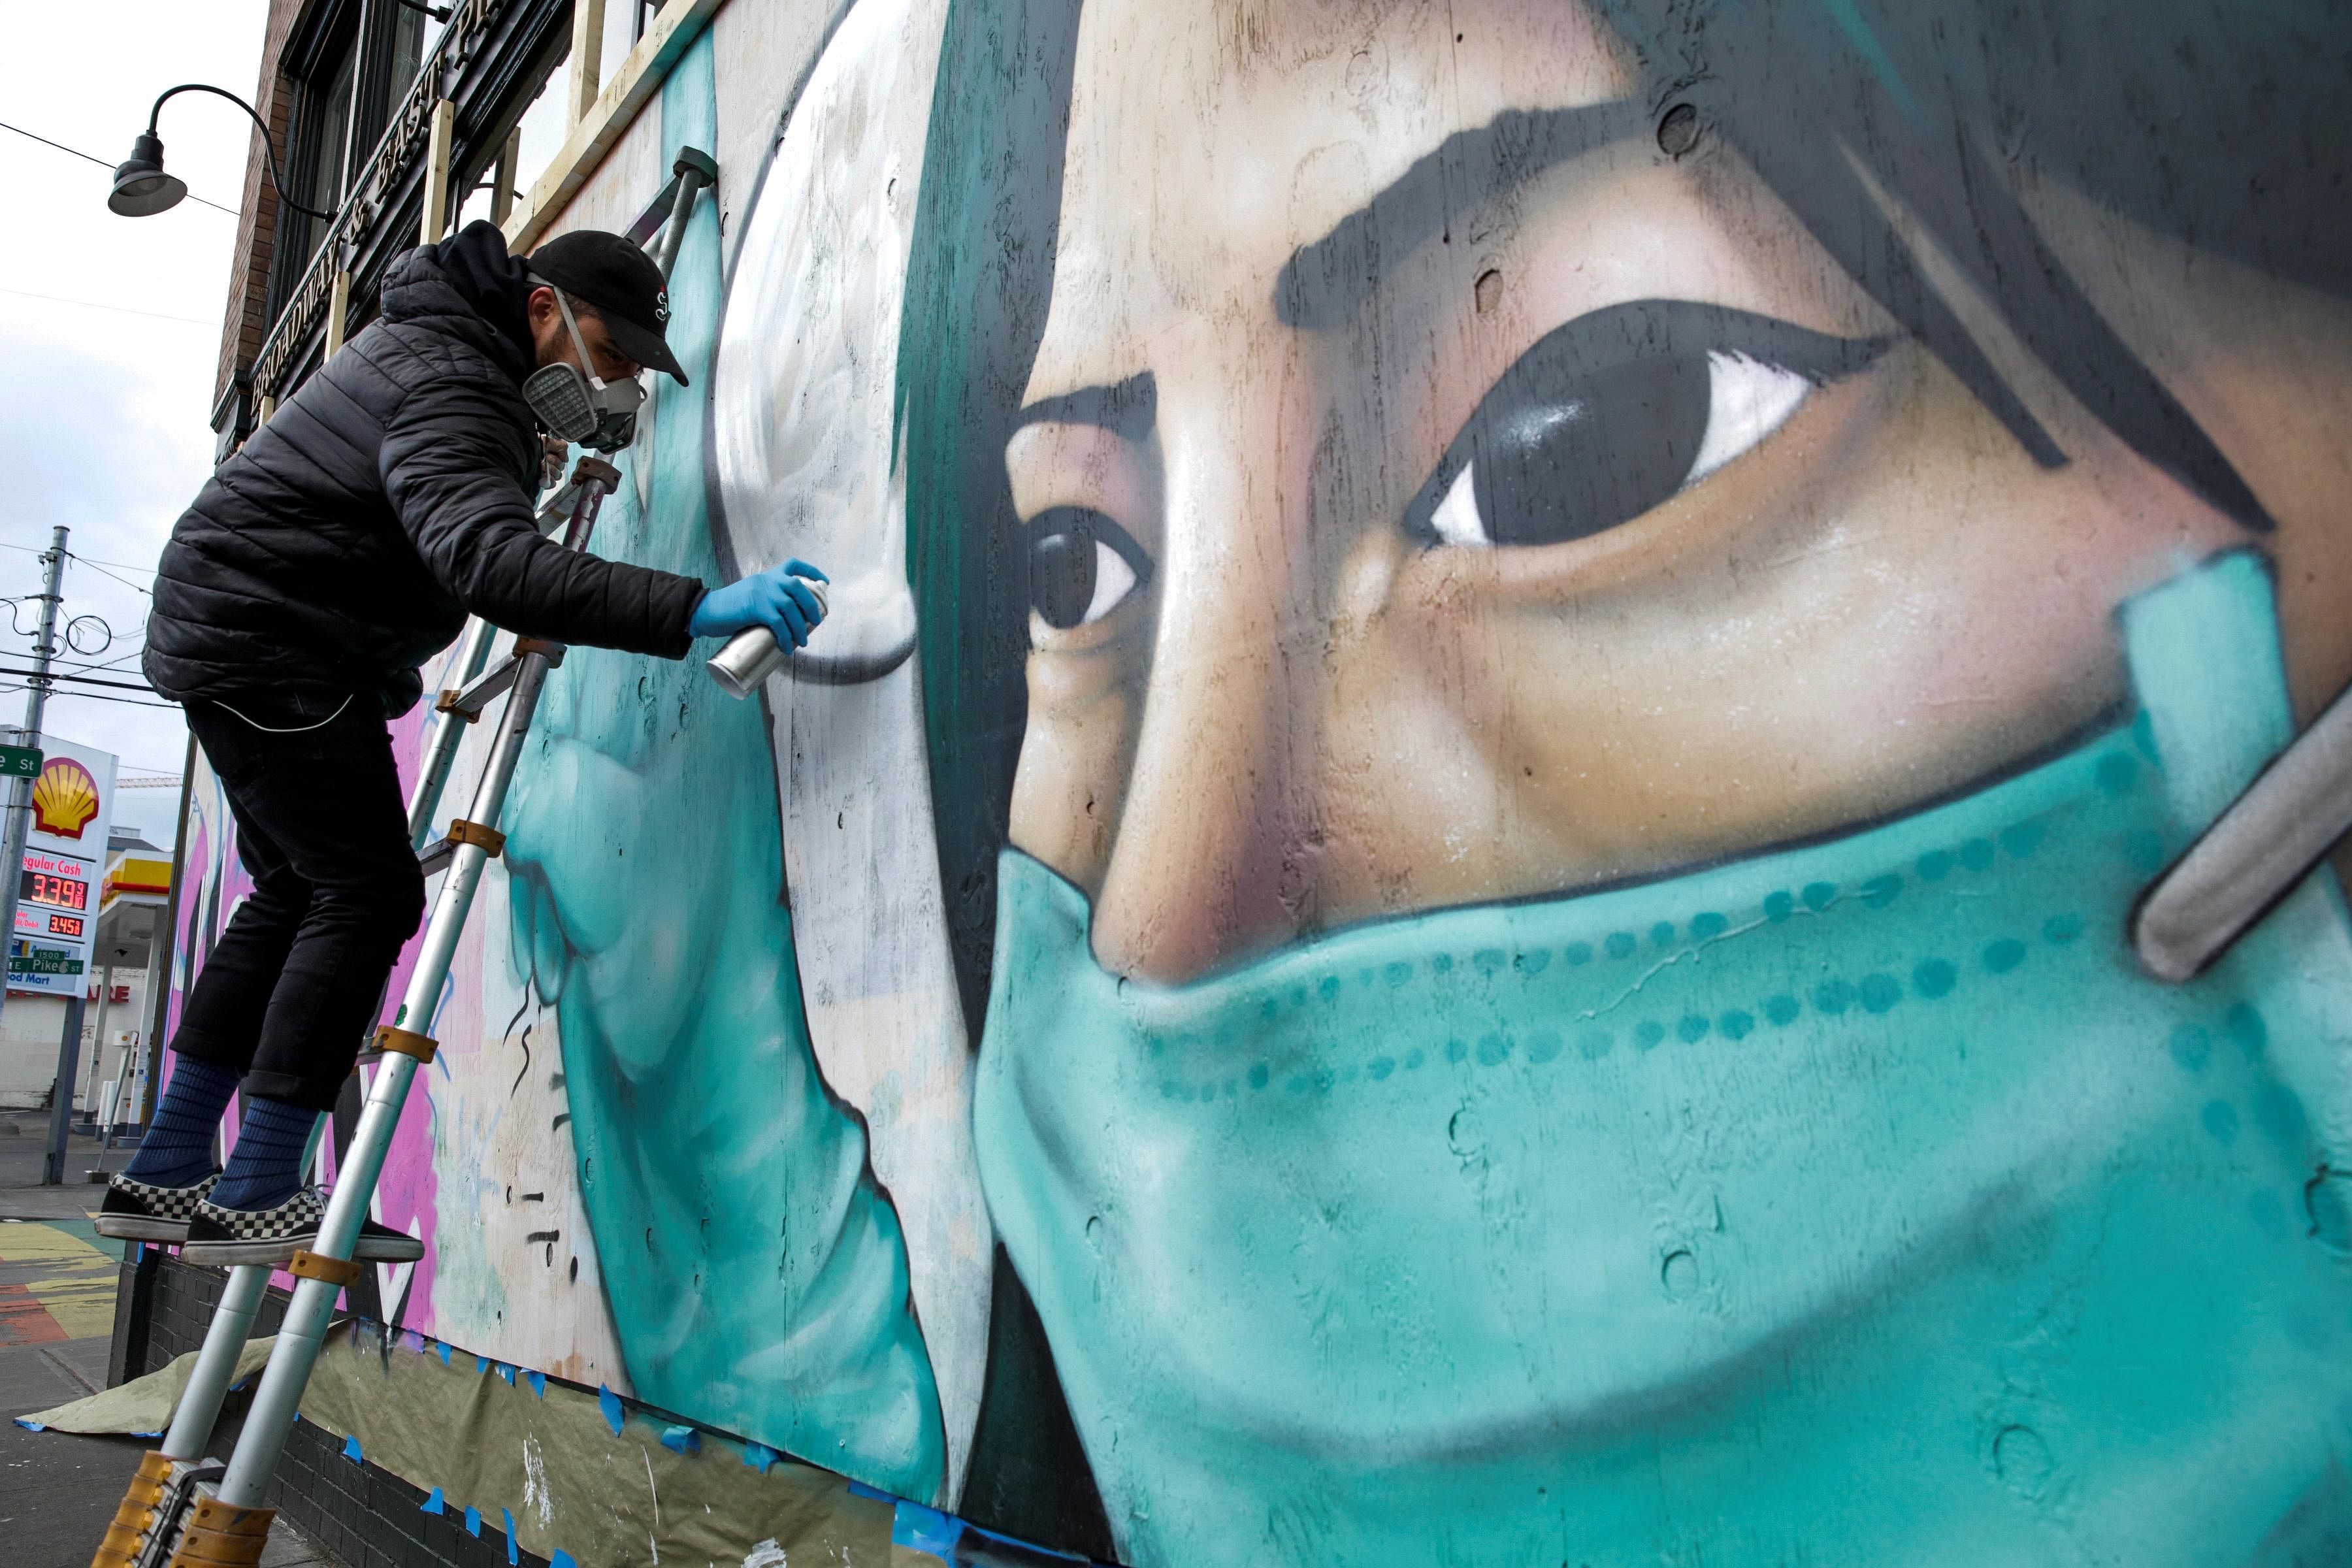 Street artist Carlos Giovanni, who goes by the name TheyDrift, works on the portrait of a healthcare worker for a piece he calls "Stay Home" in Seattle. (Credit: Reuters)